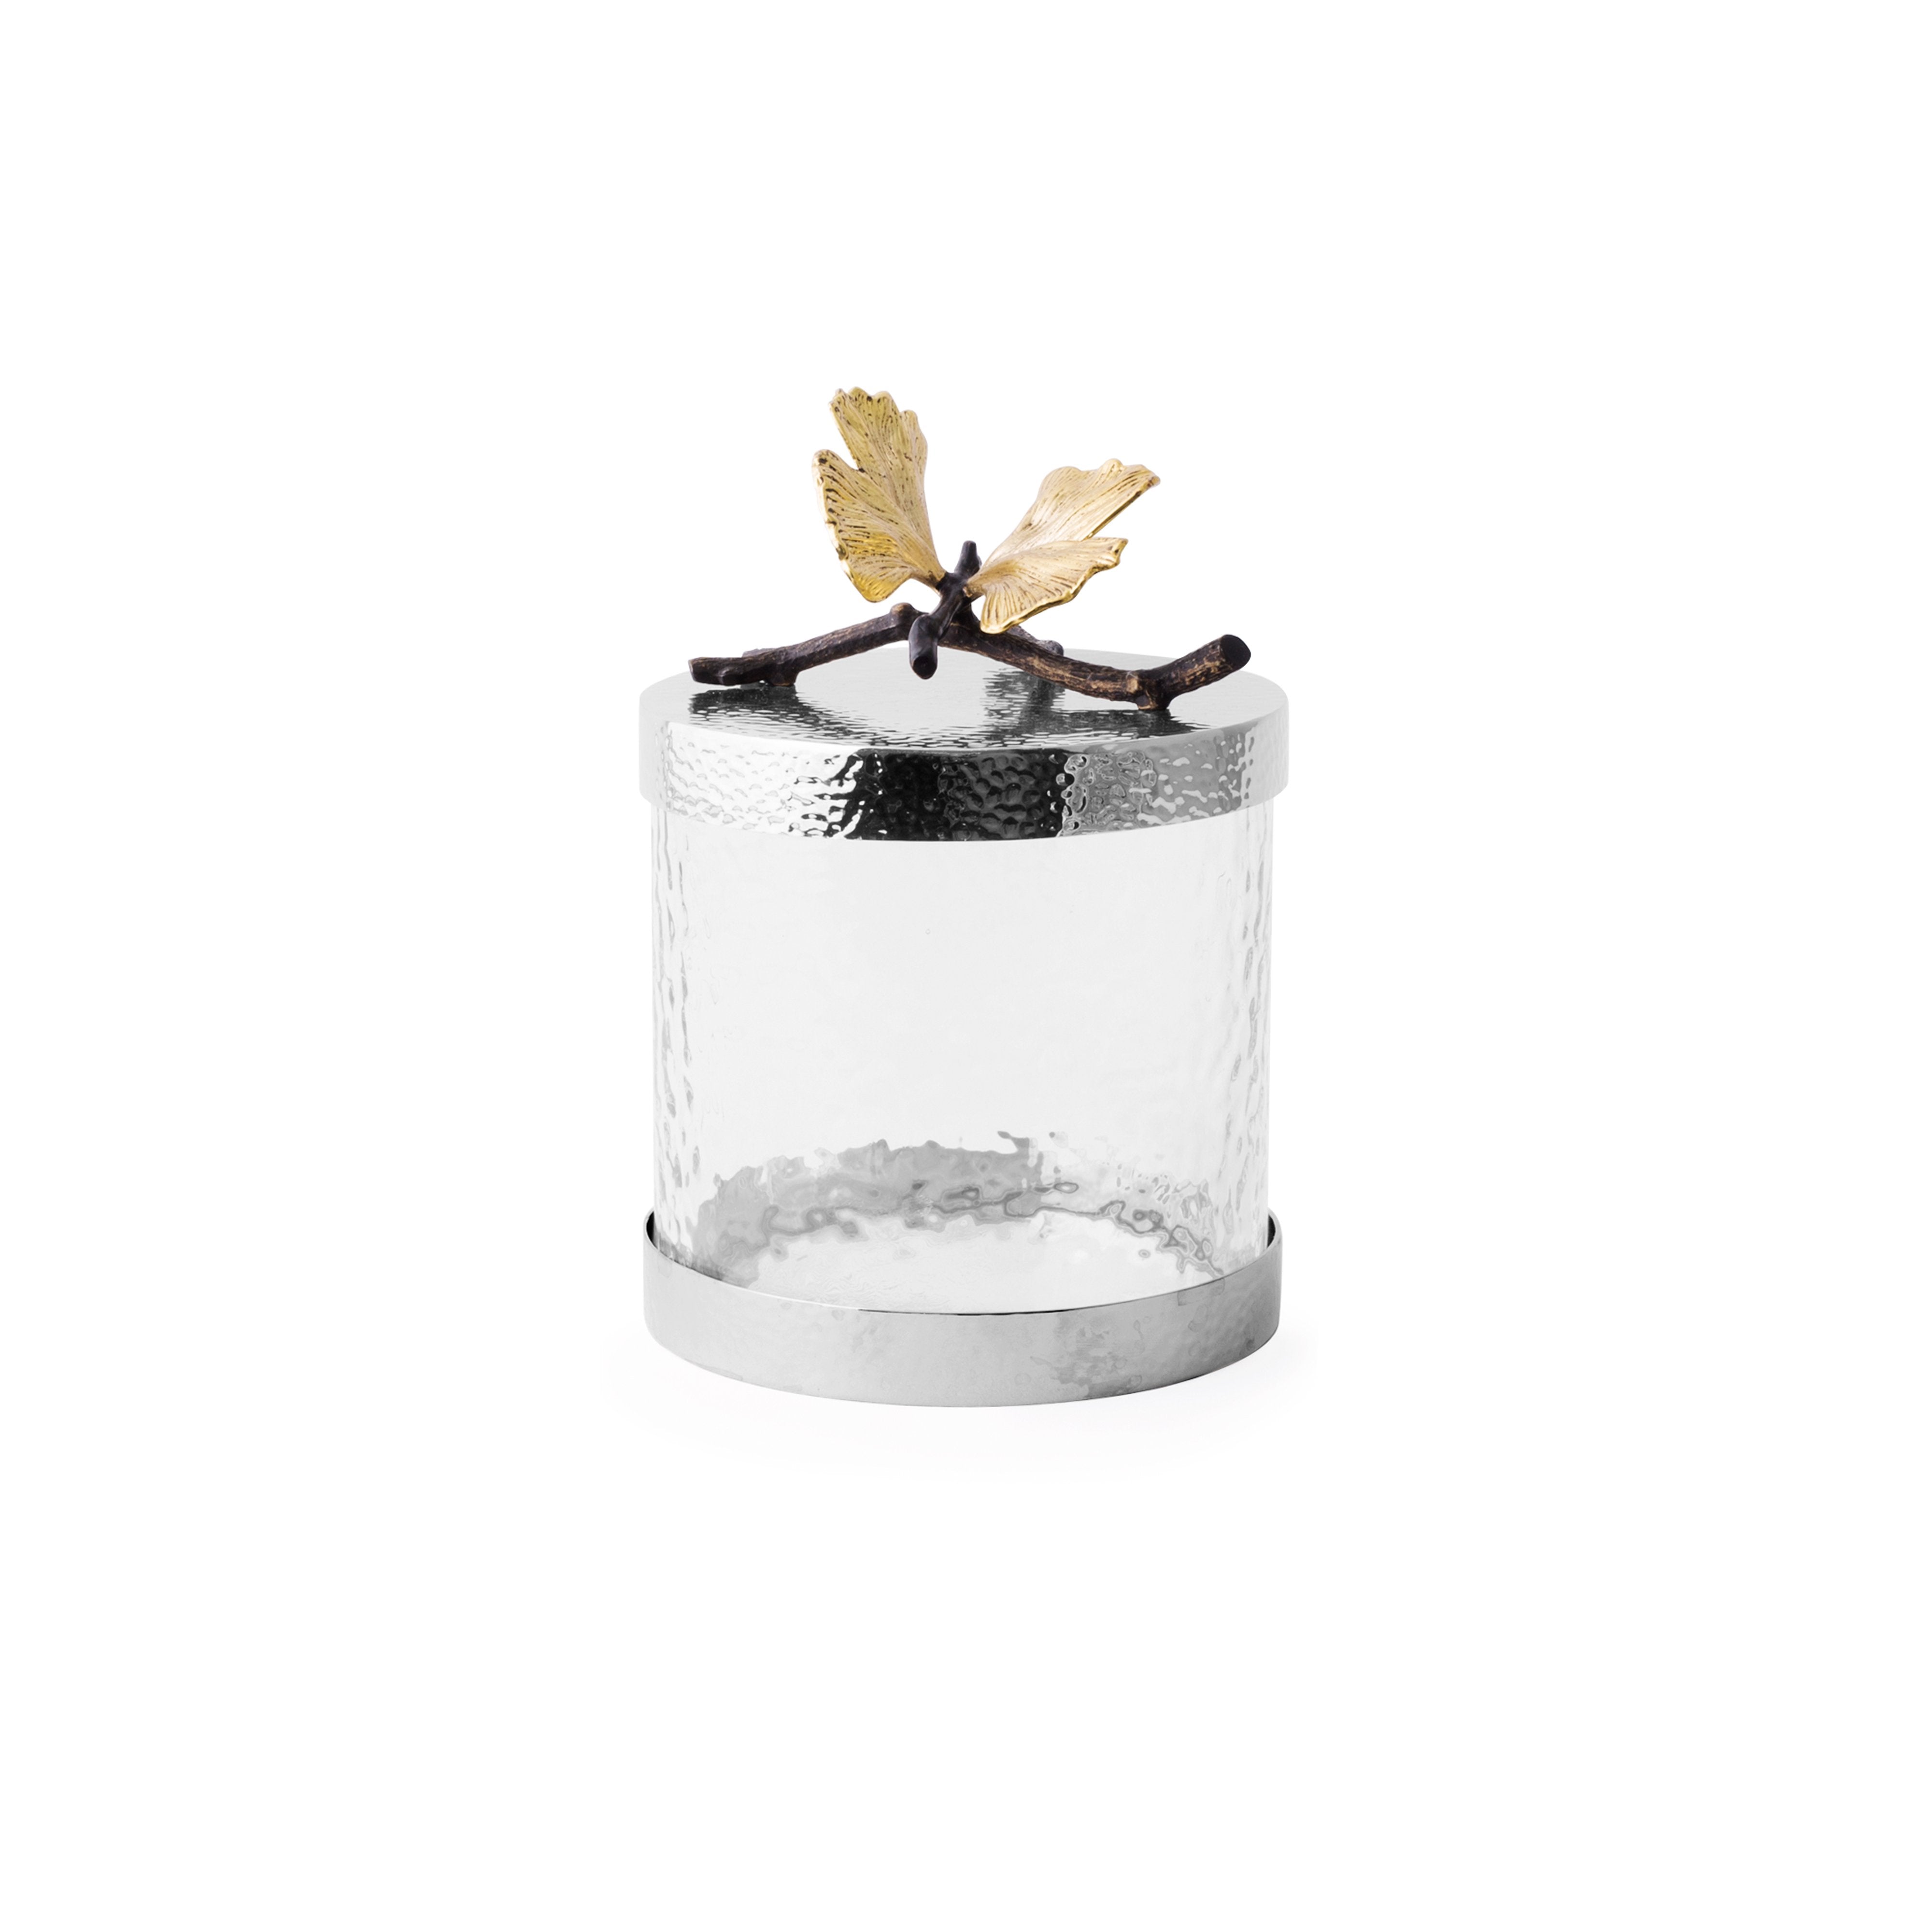 https://cdn.shopify.com/s/files/1/0264/1510/4081/products/Michael_Aram_Butterfly_Ginkgo_Extra_Small_Cannister_7409b7c3-5797-416a-bebe-761464d2ad01.jpg?v=1595619499